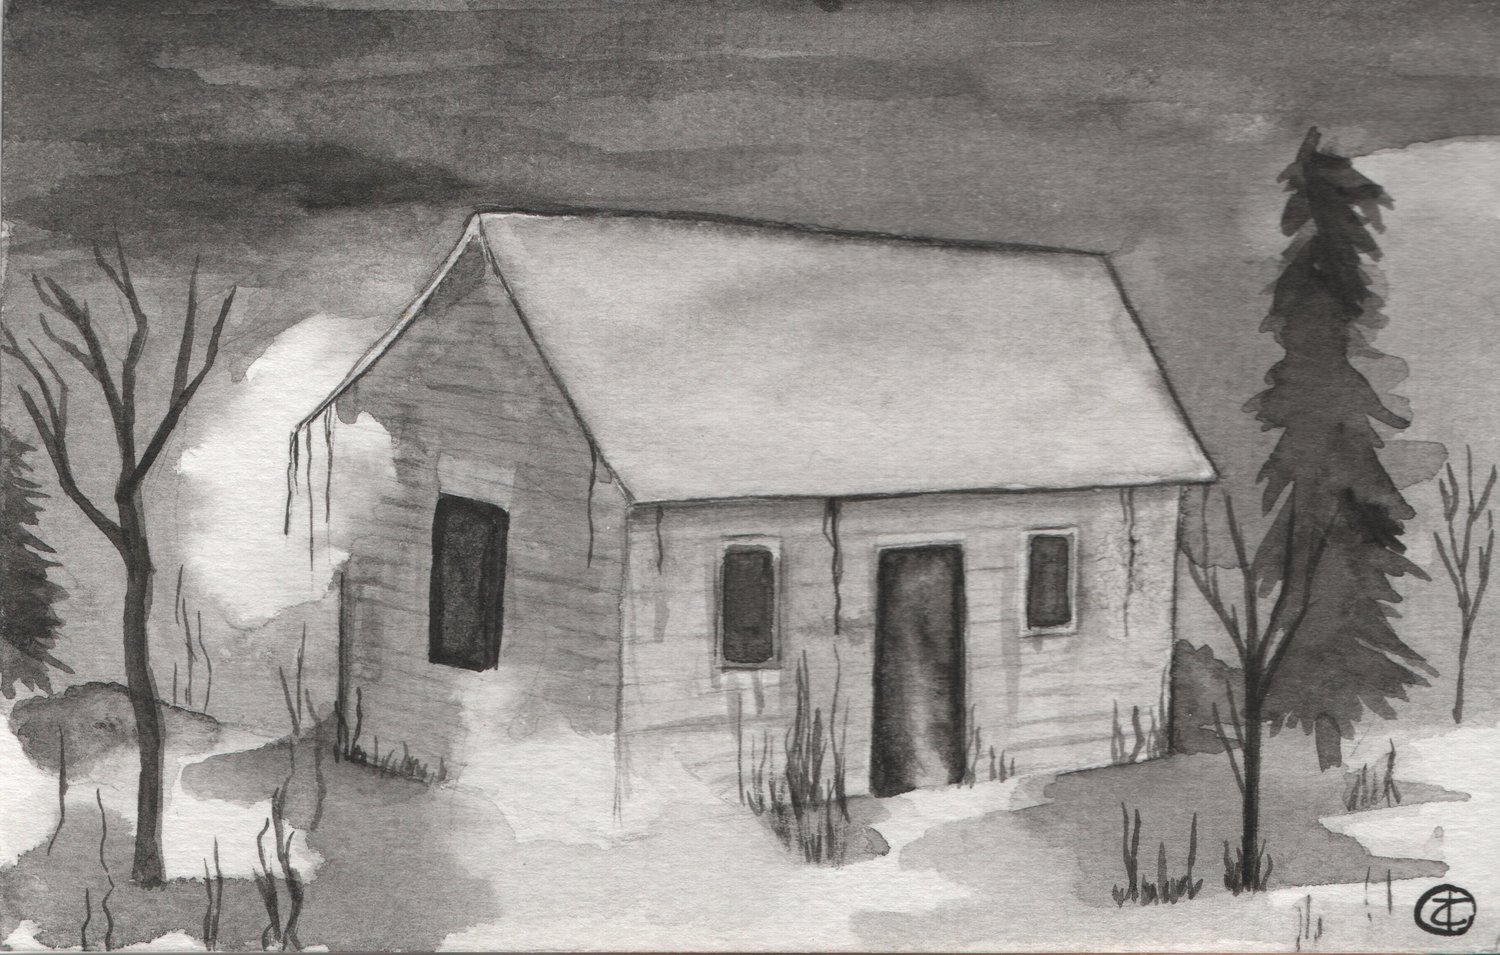 The Haunted Cabin